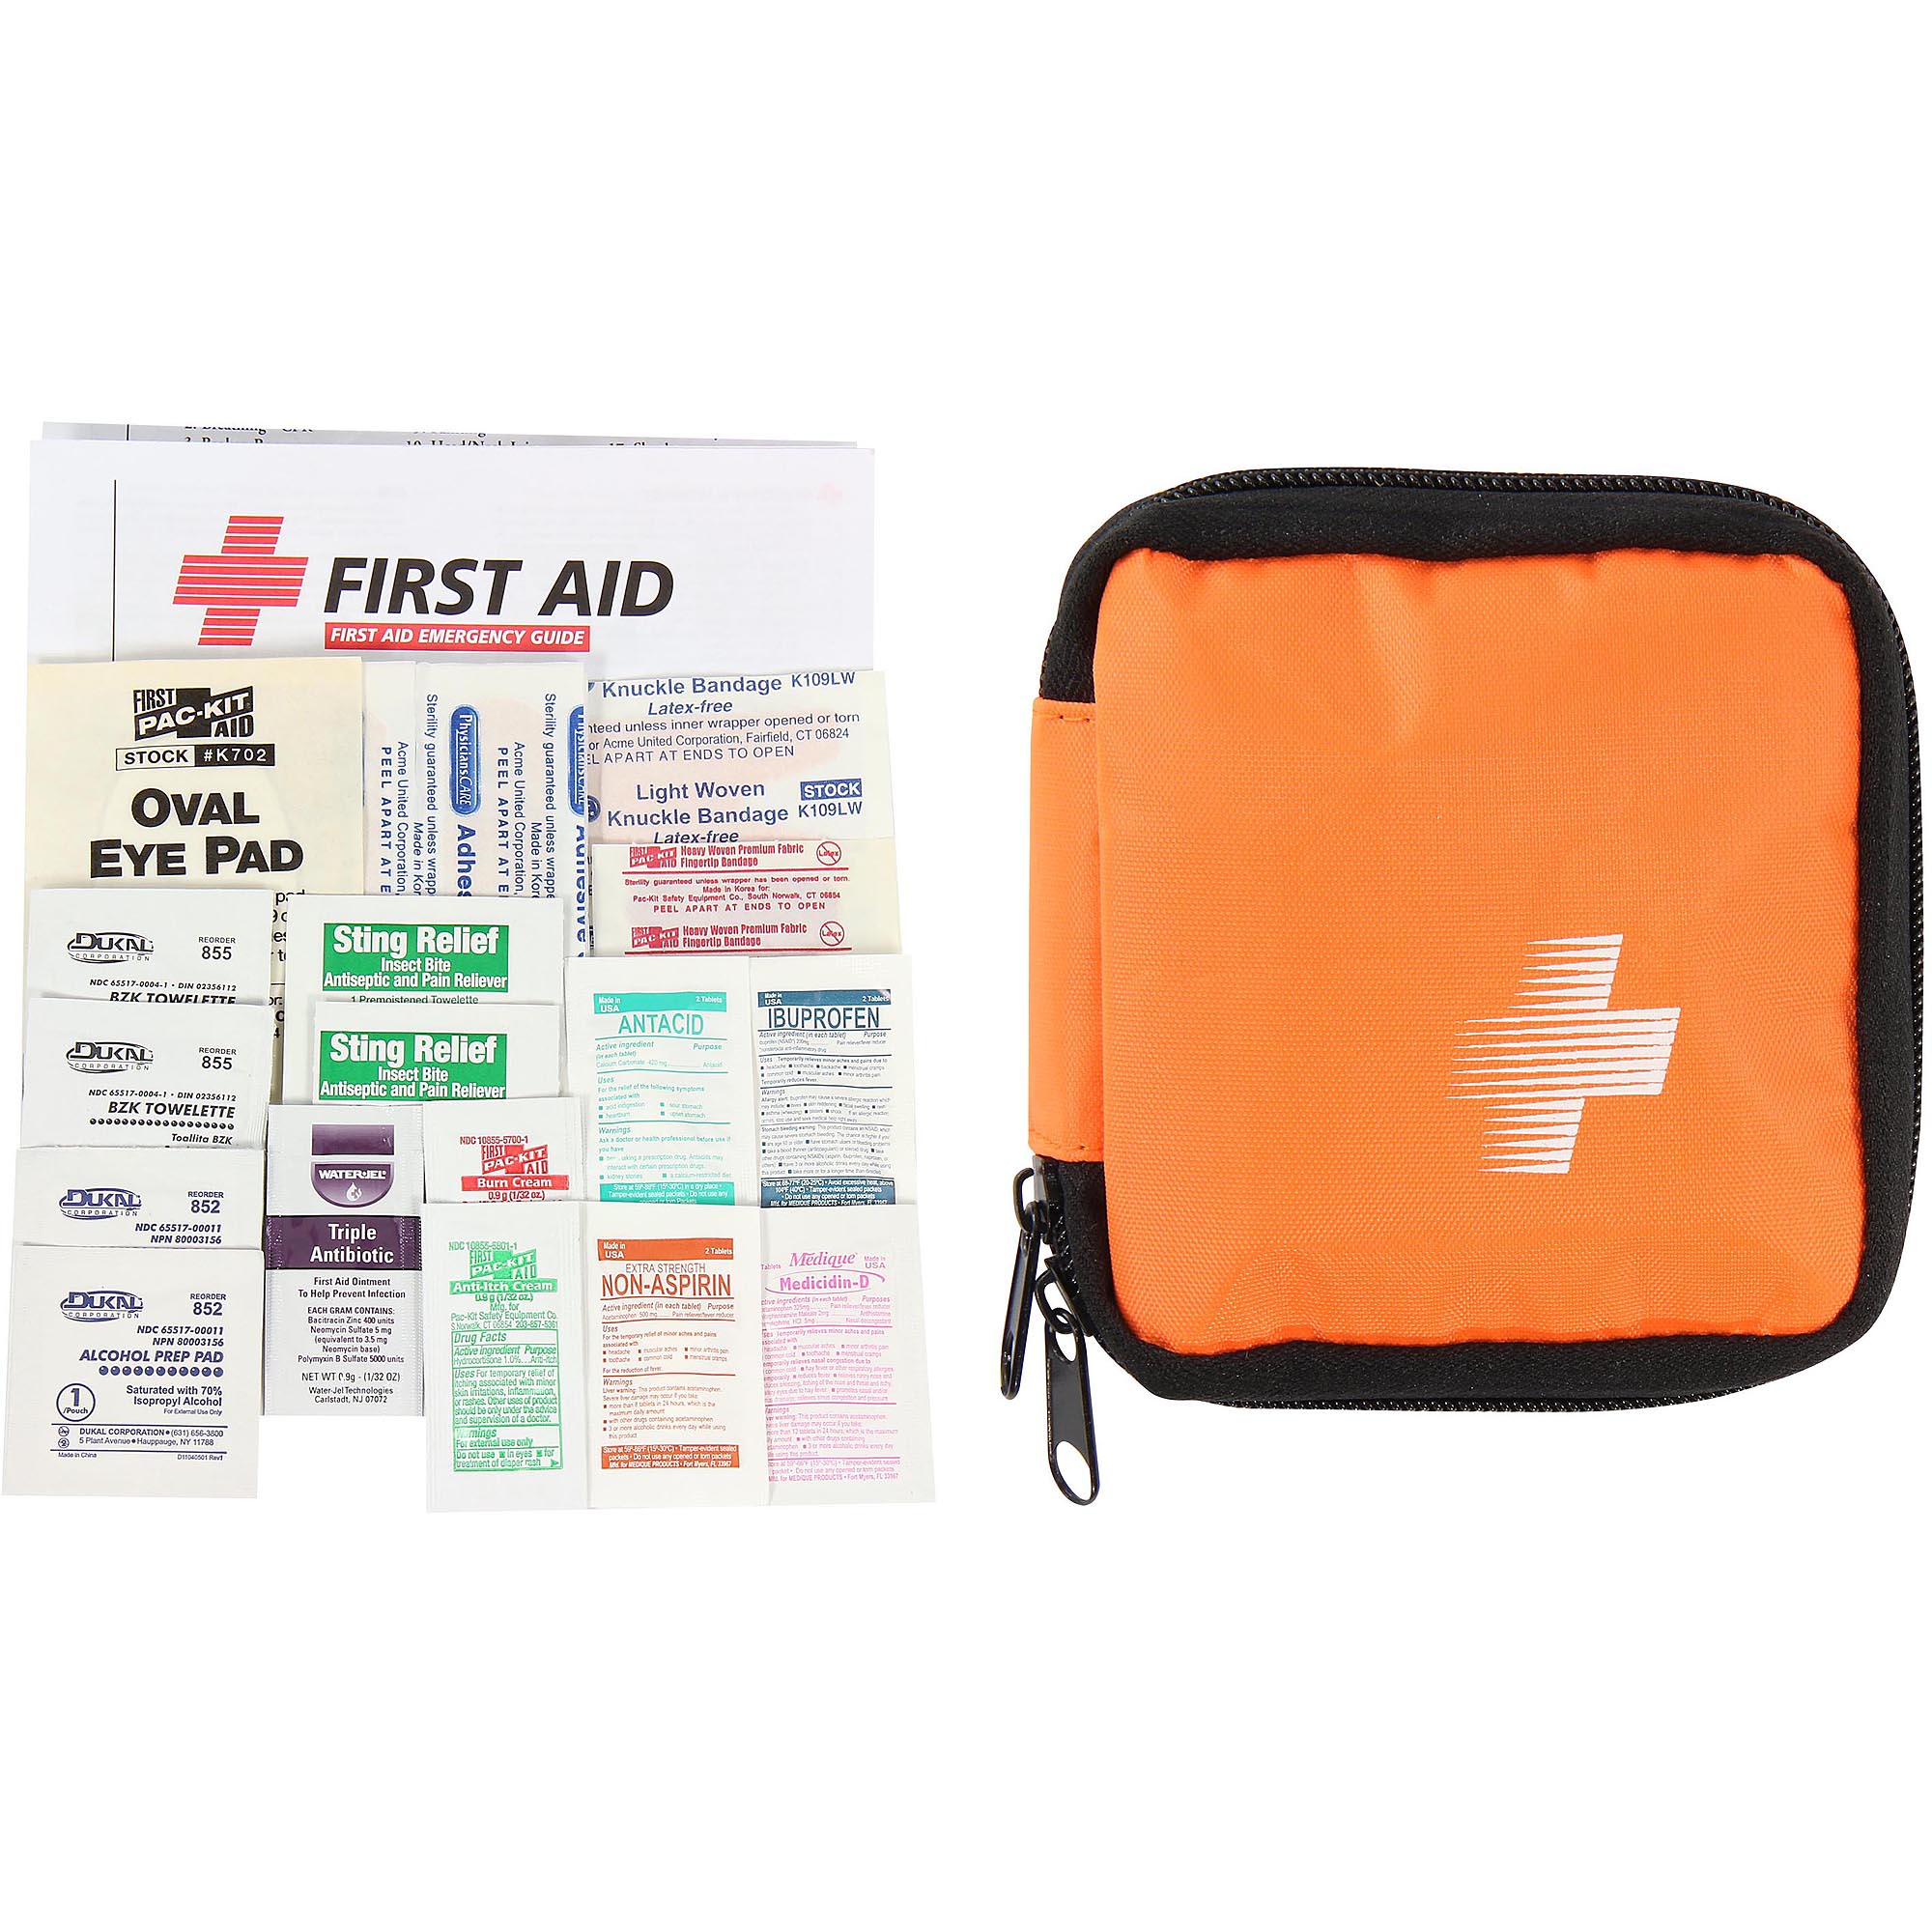 30-piece hunter’s first aid kit for $5